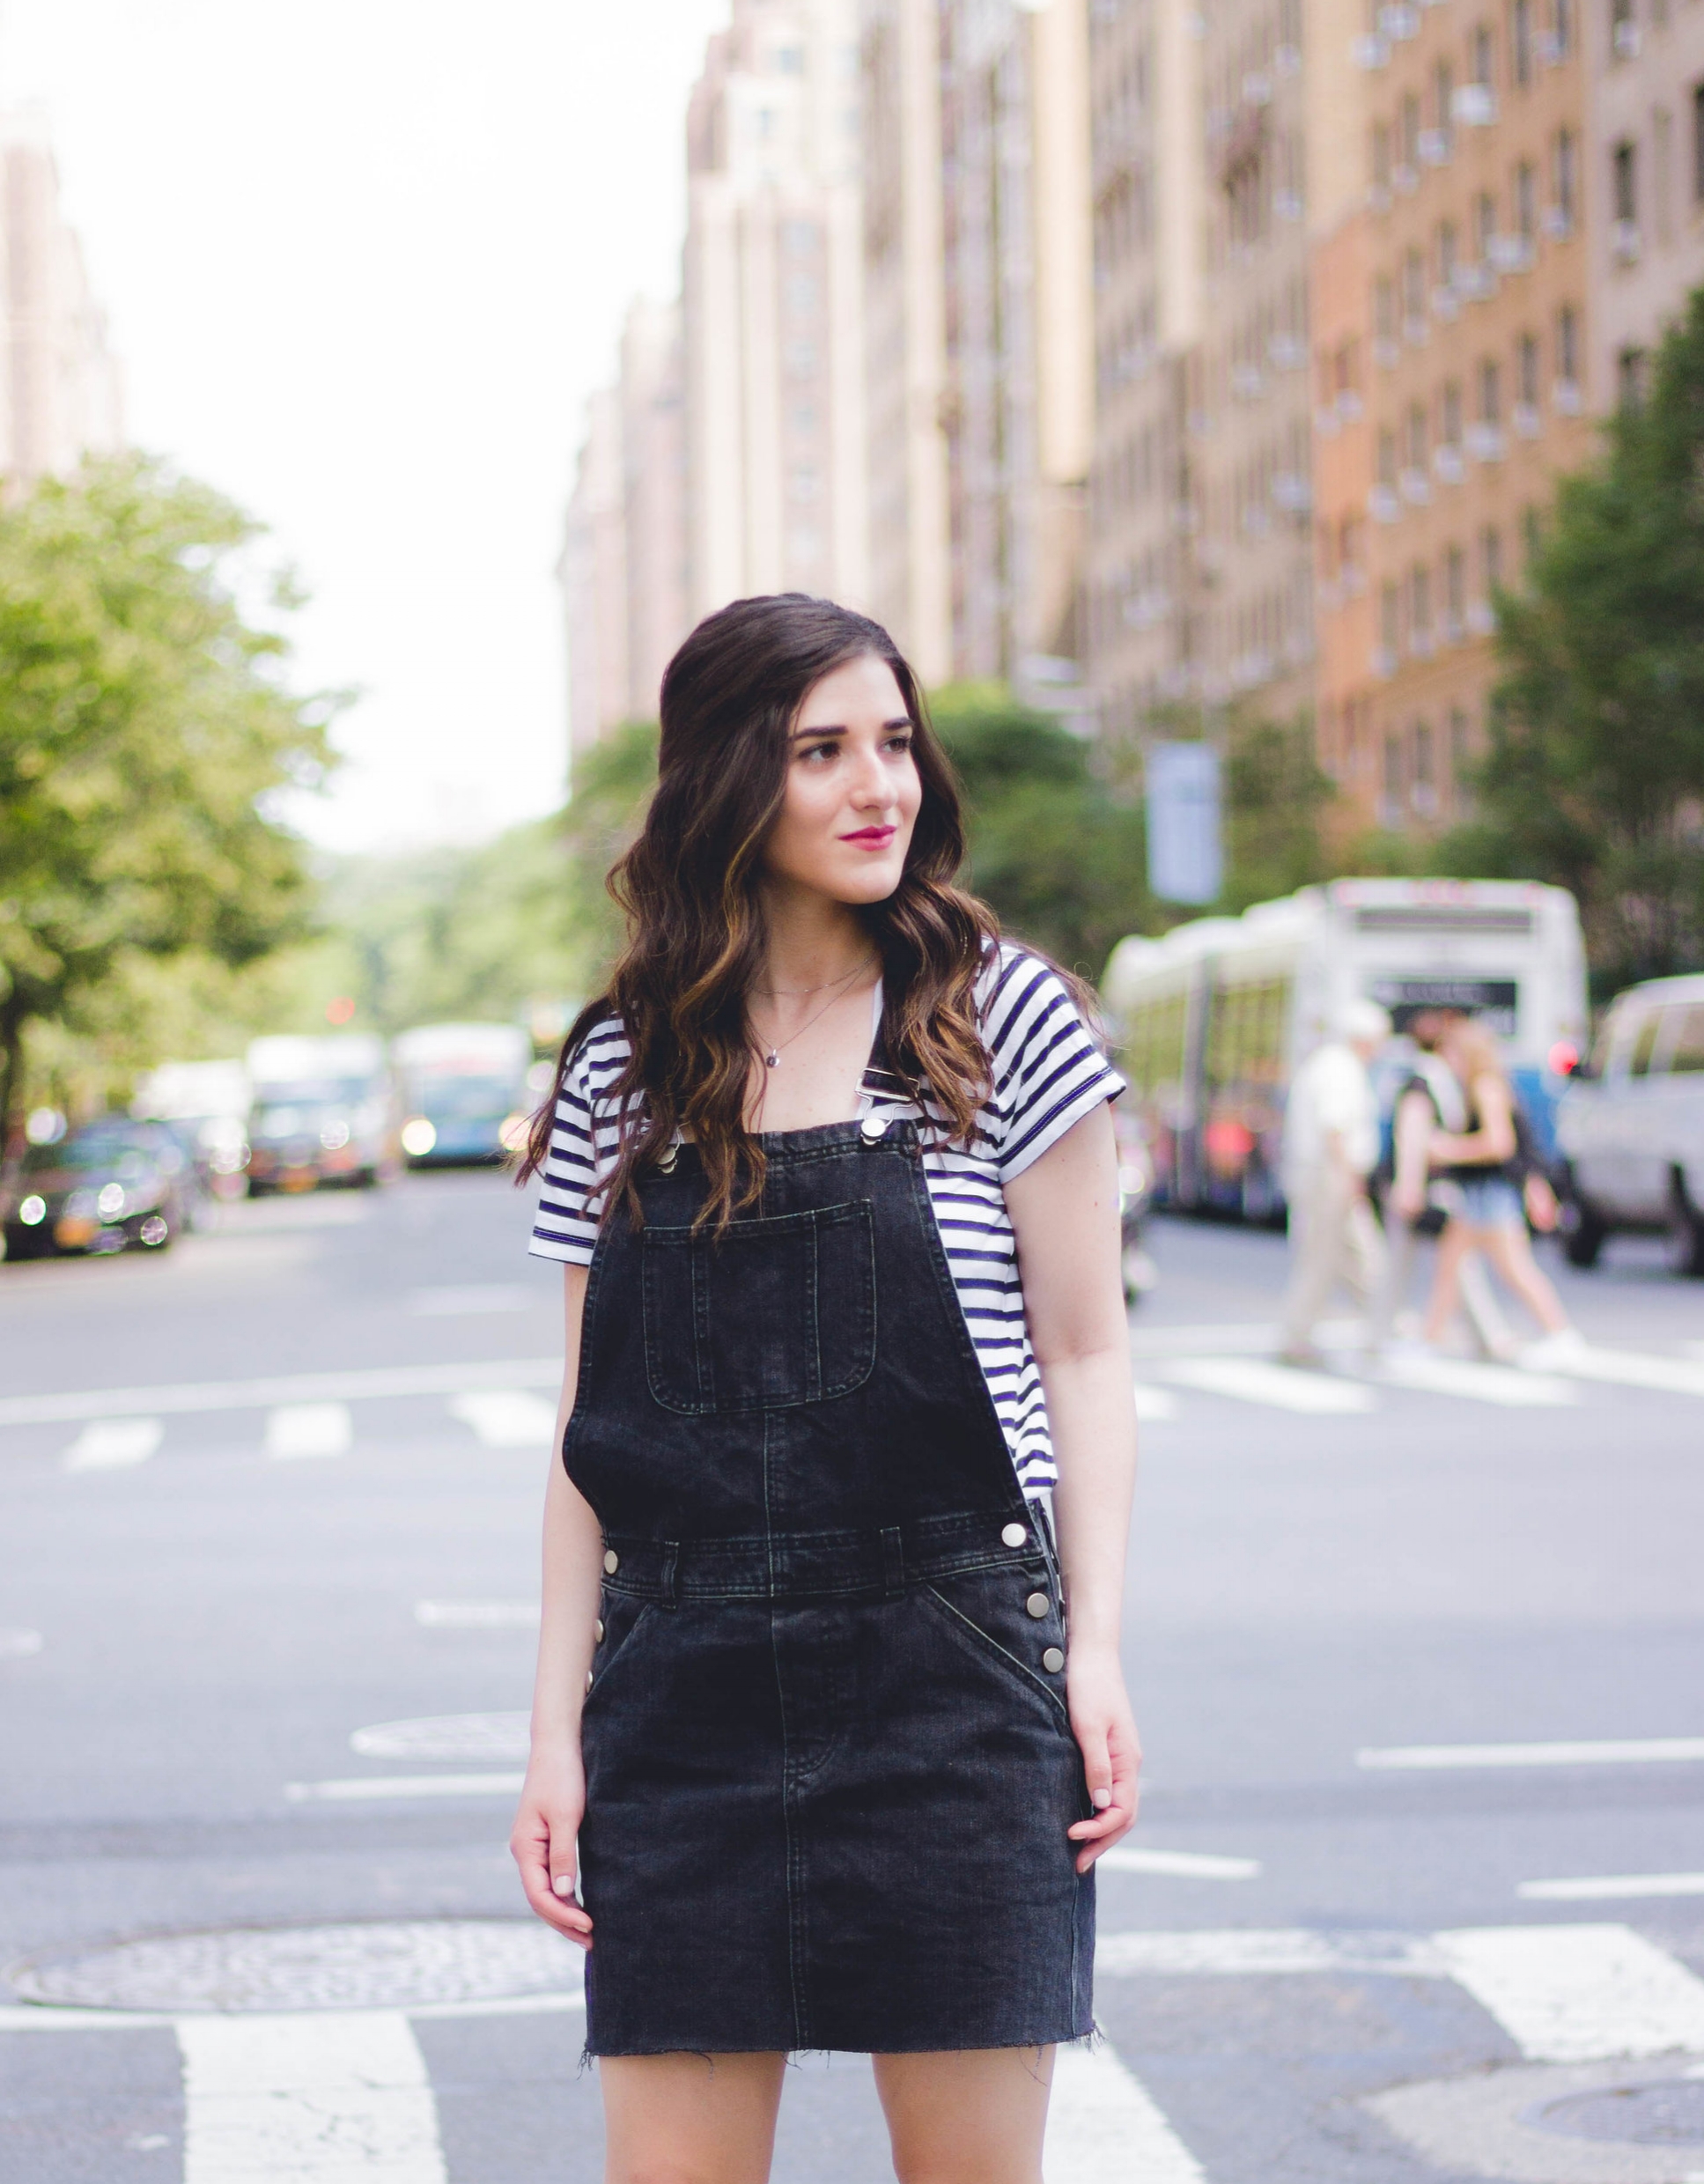 Dress Overalls Striped Tee The Creepiest Messages I've Received As A Blogger Esther Santer Fashion Blog NYC Street Style Blogger Outfit OOTD Trendy  ASOS Photoshoot Sandals Girl Women New York City Model Pretty Silver Necklace Mejuri Shoes Accessories.jpg